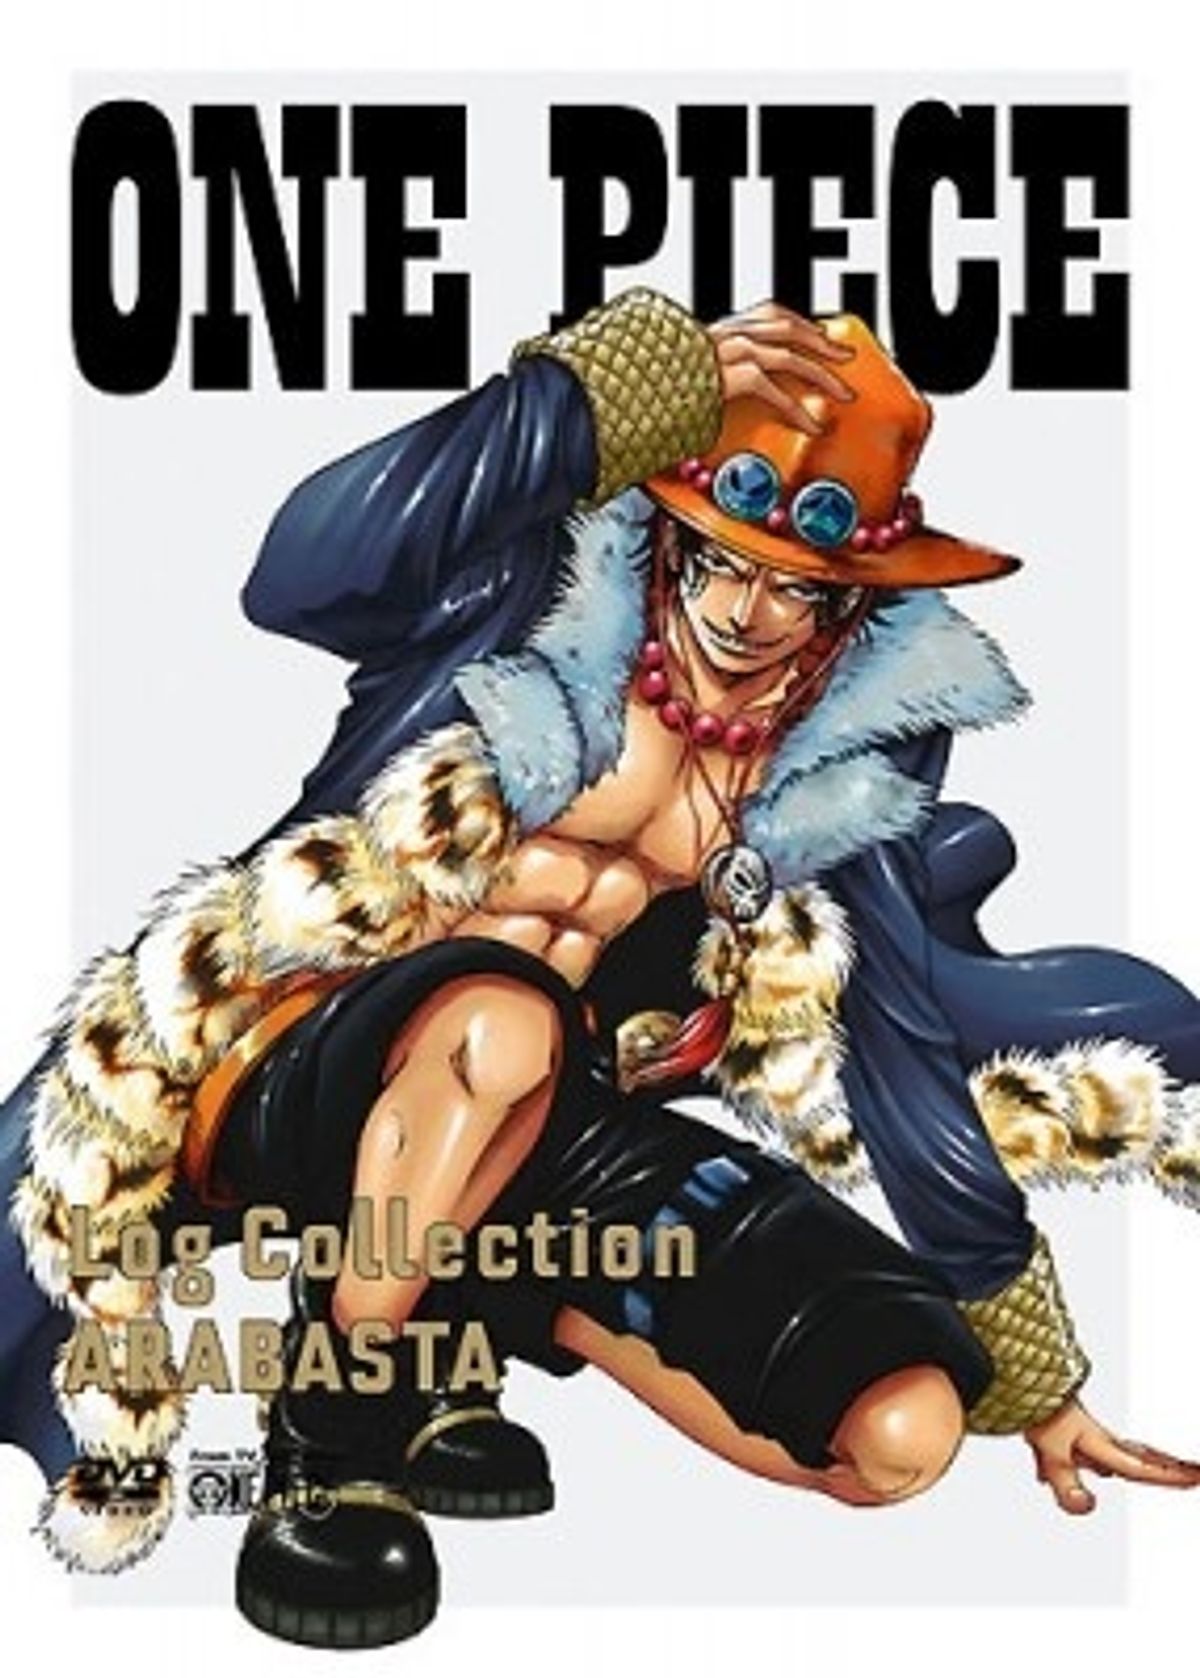 DVD] ONE PIECE Log Collection 19点セット | www.gamutgallerympls.com